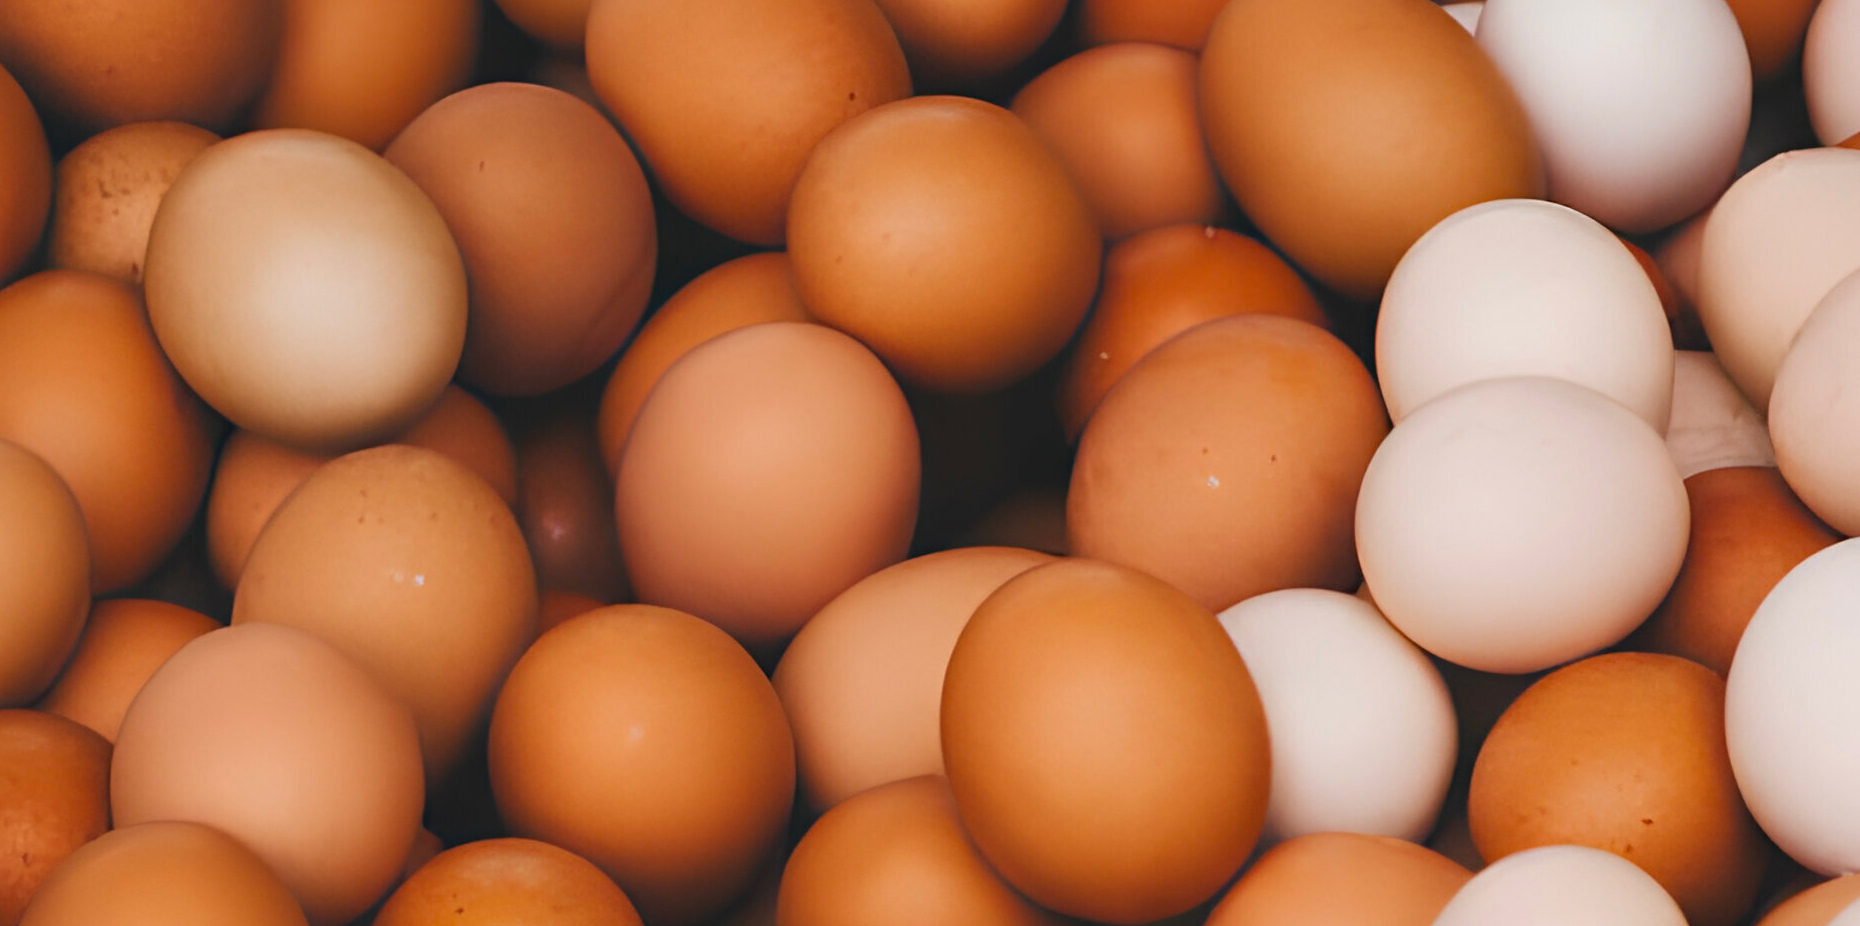 Eggs: Facts, Nutrition, Benefits, & More